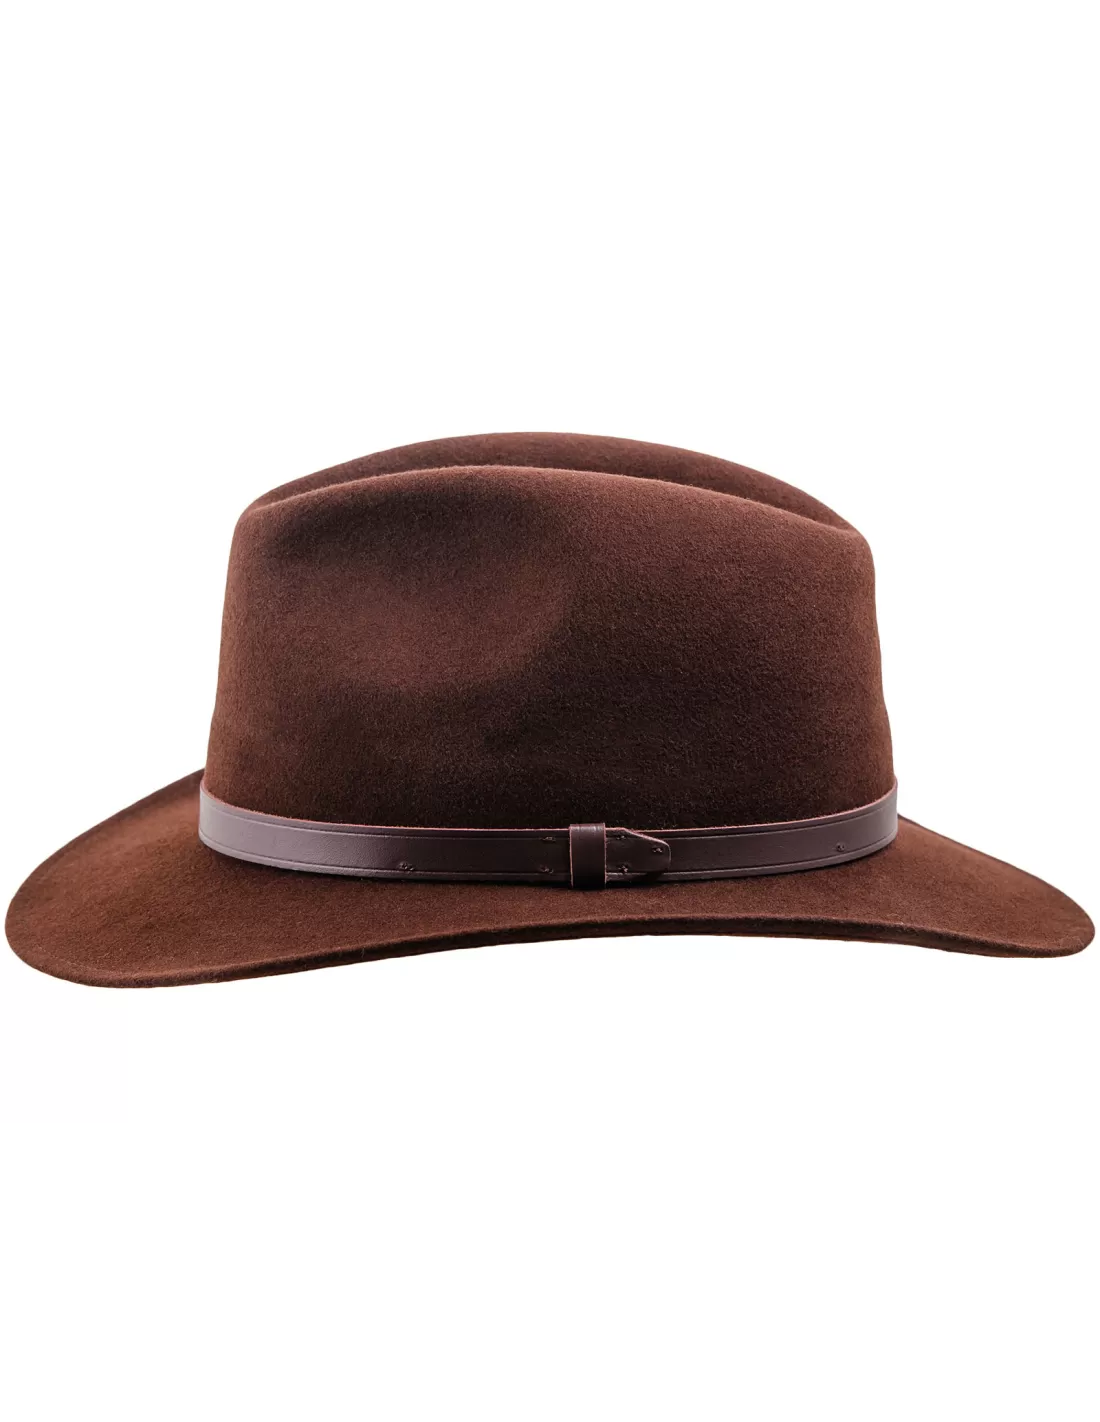 Wondering how to clean hat? Get one of the best hat accessories.